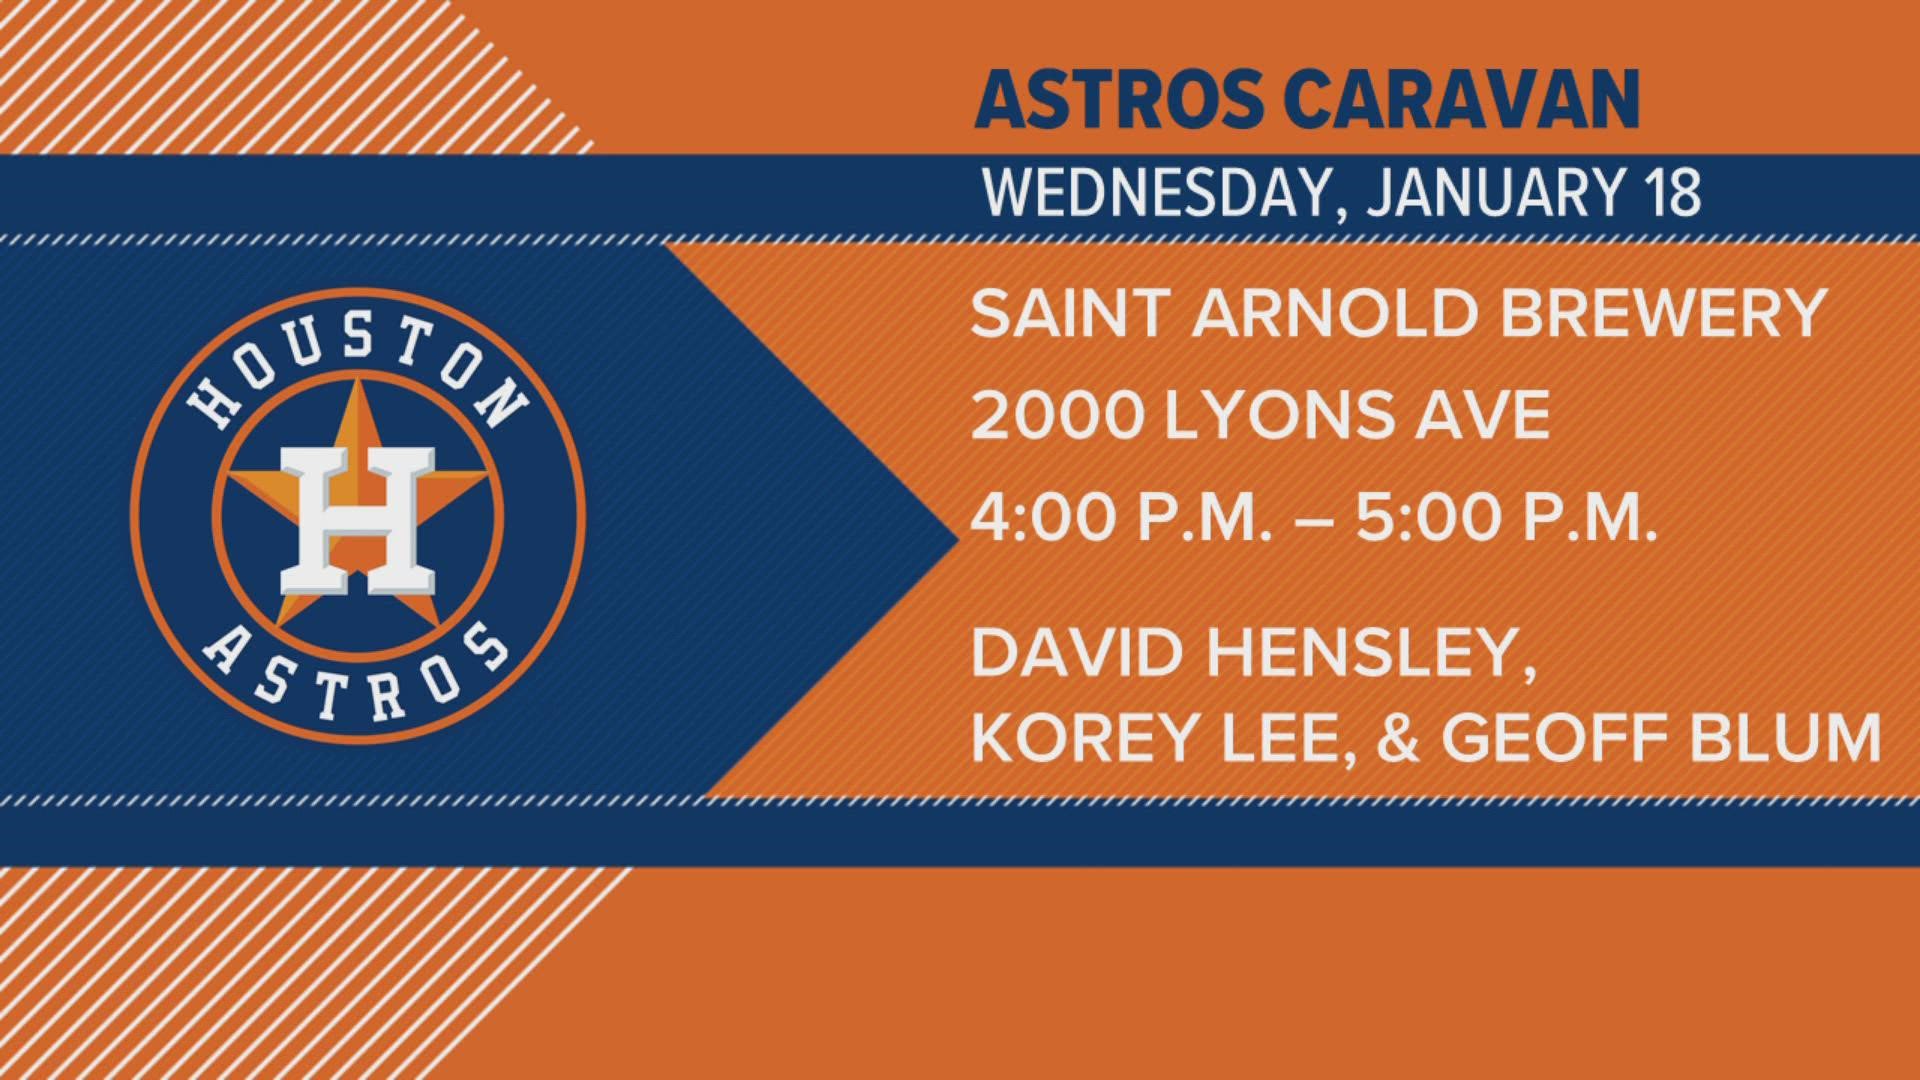 The tour will run through Jan. 19, just two days before the Astros host their Fan Fest at Minute Maid Park on Saturday.